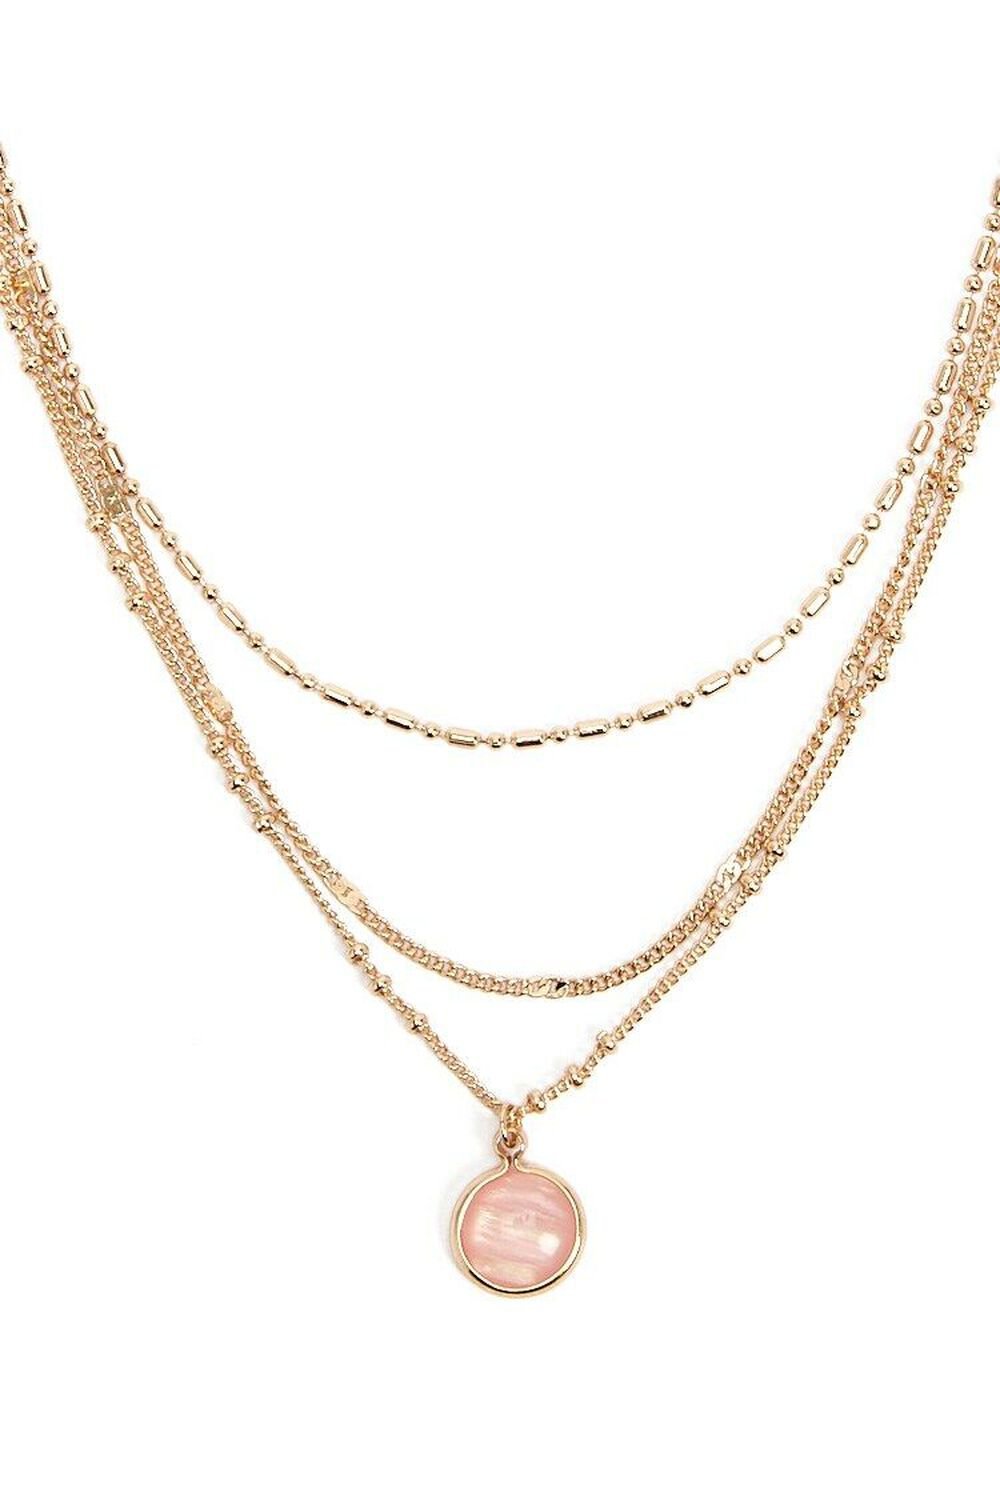 GOLD/PINK Layered Chain Necklace, image 1